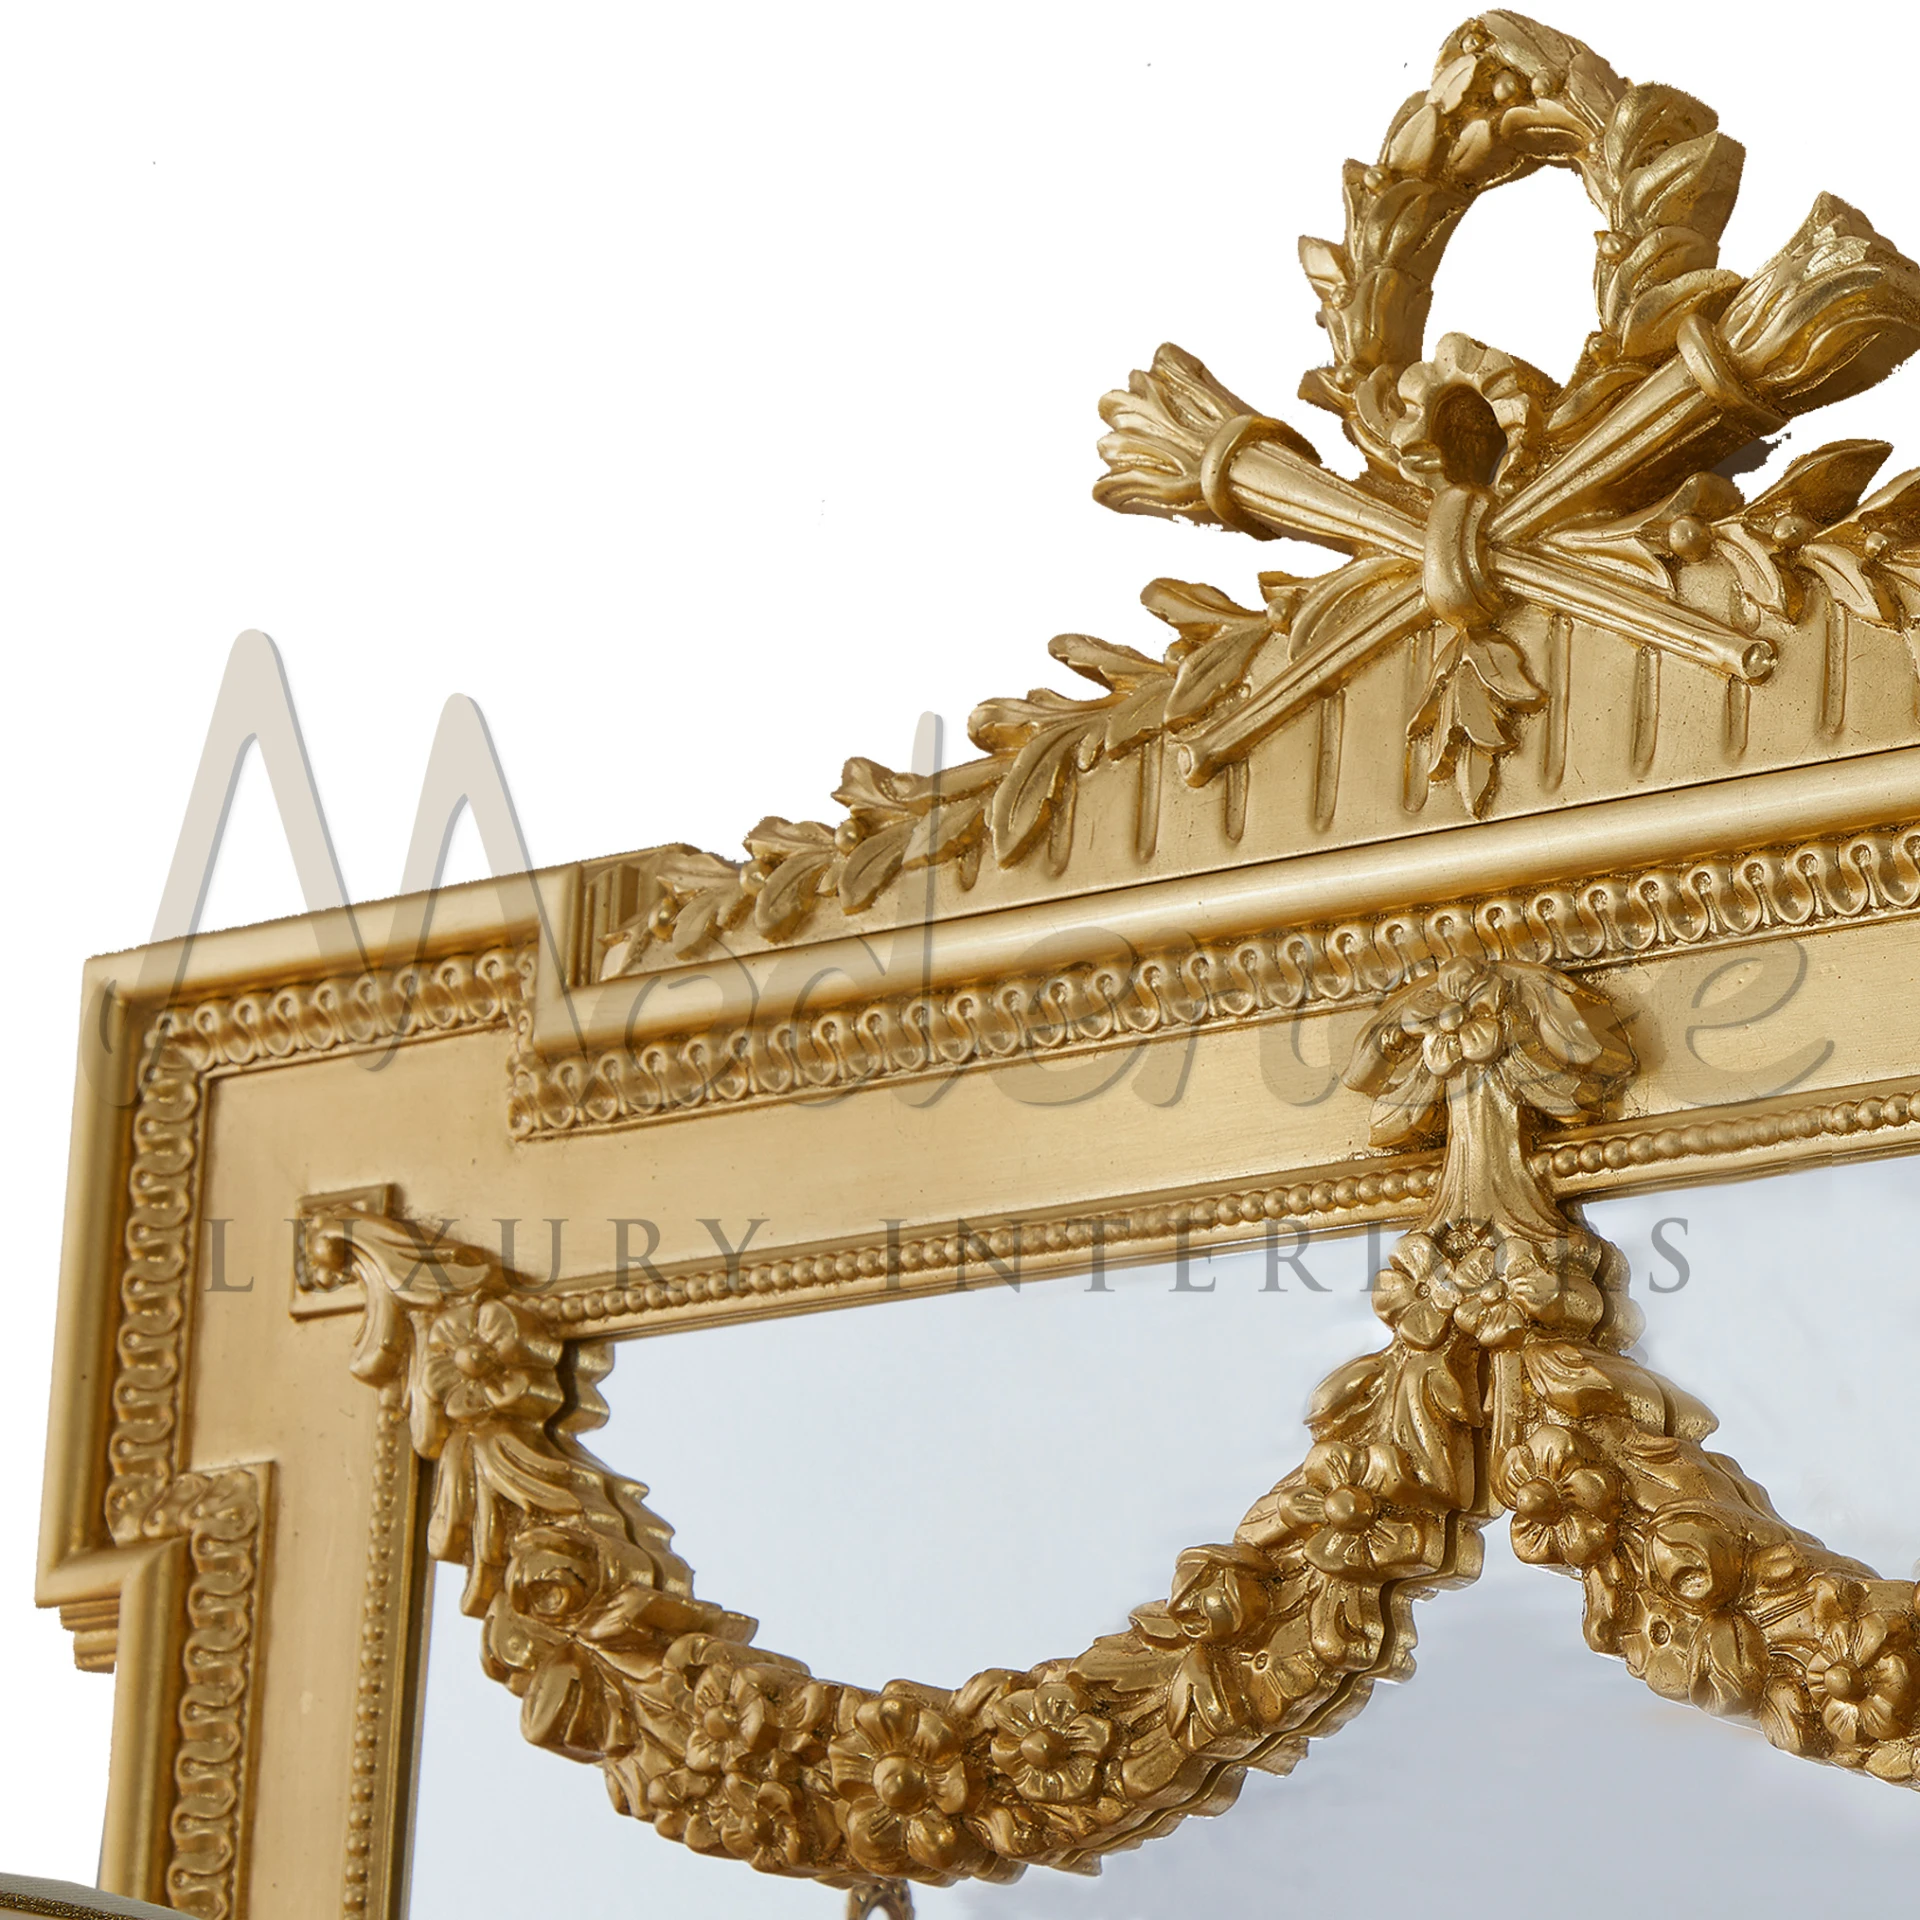 Experience the drama of the late Baroque period with this exquisite, handmade mirror, enhancing any home decor with style.